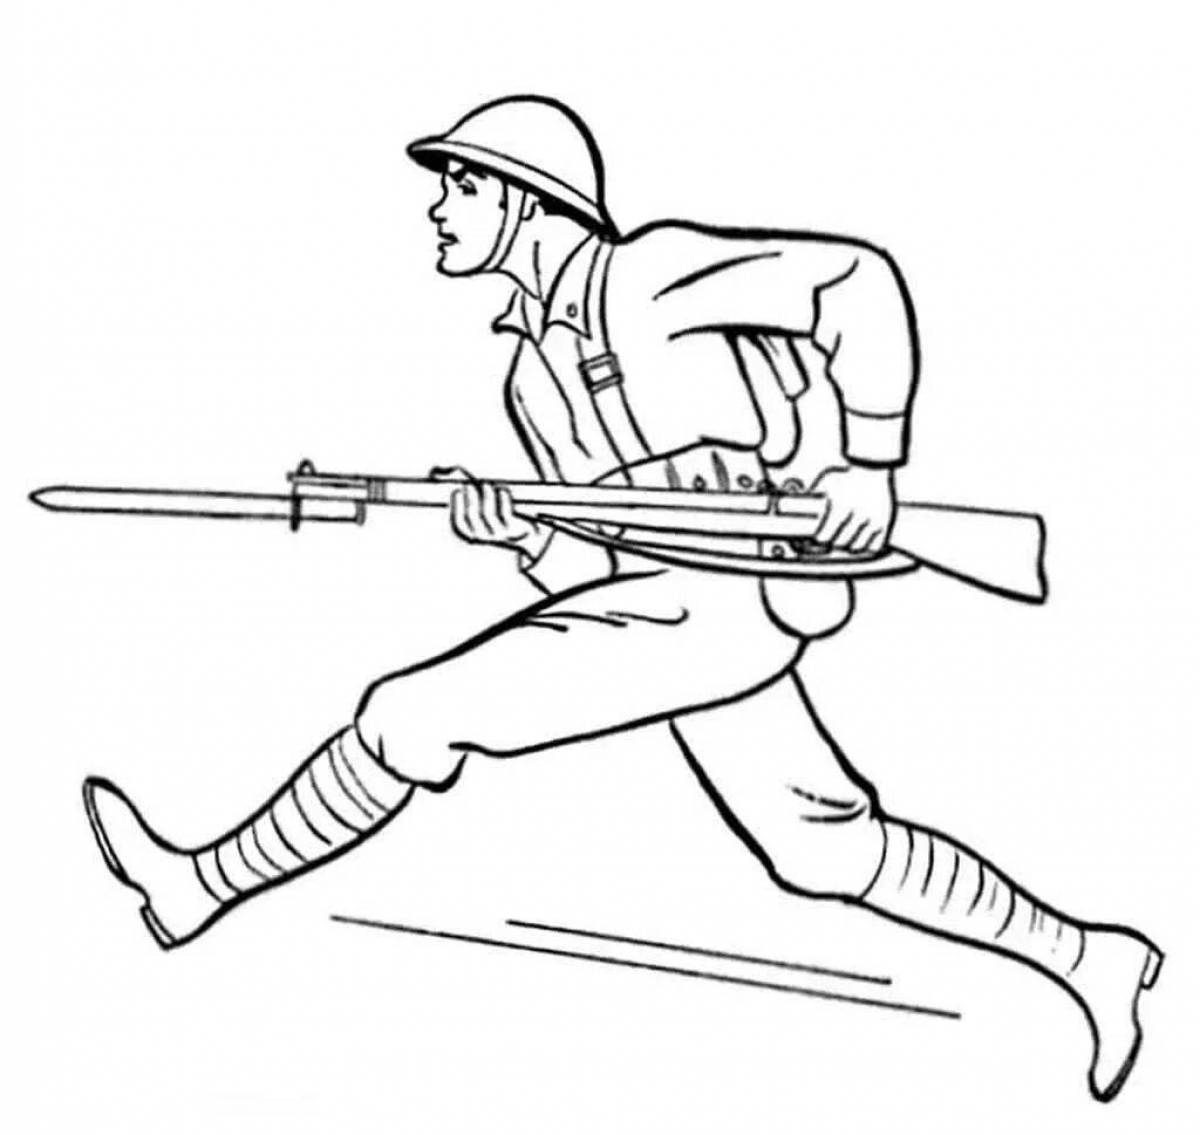 Animated soldier coloring page for kids